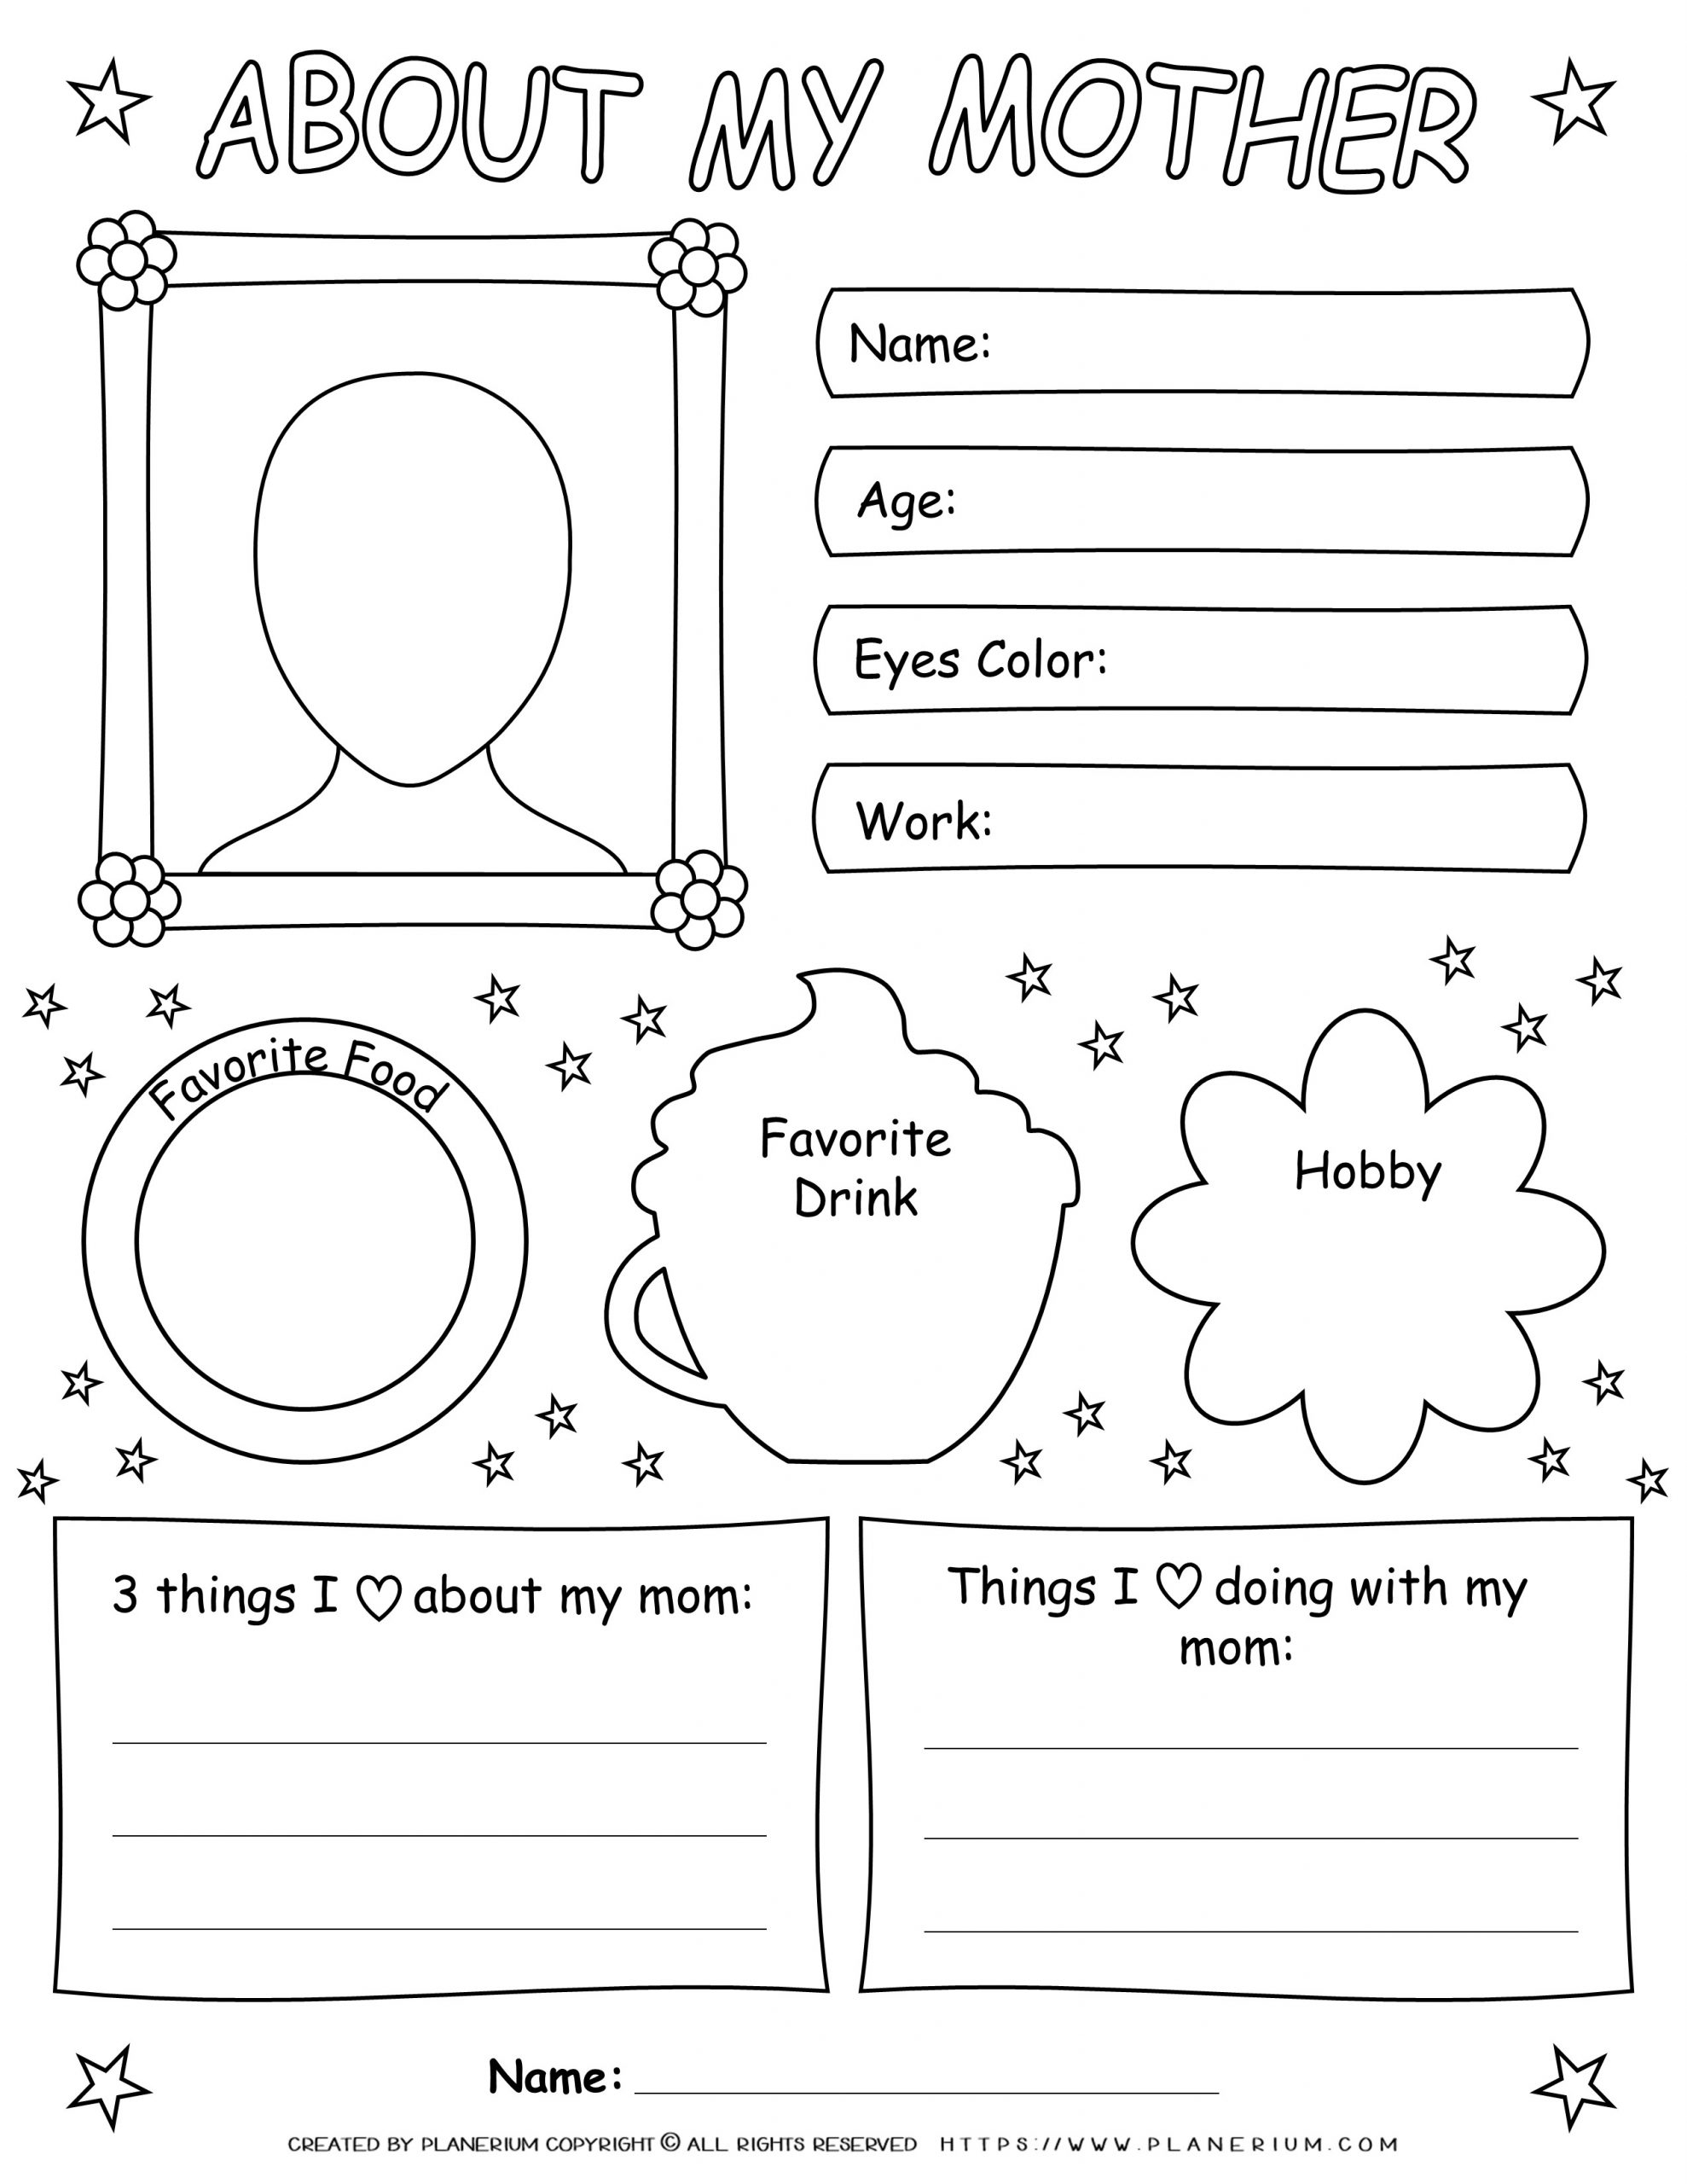 mother-s-day-worksheet-about-my-mother-planerium